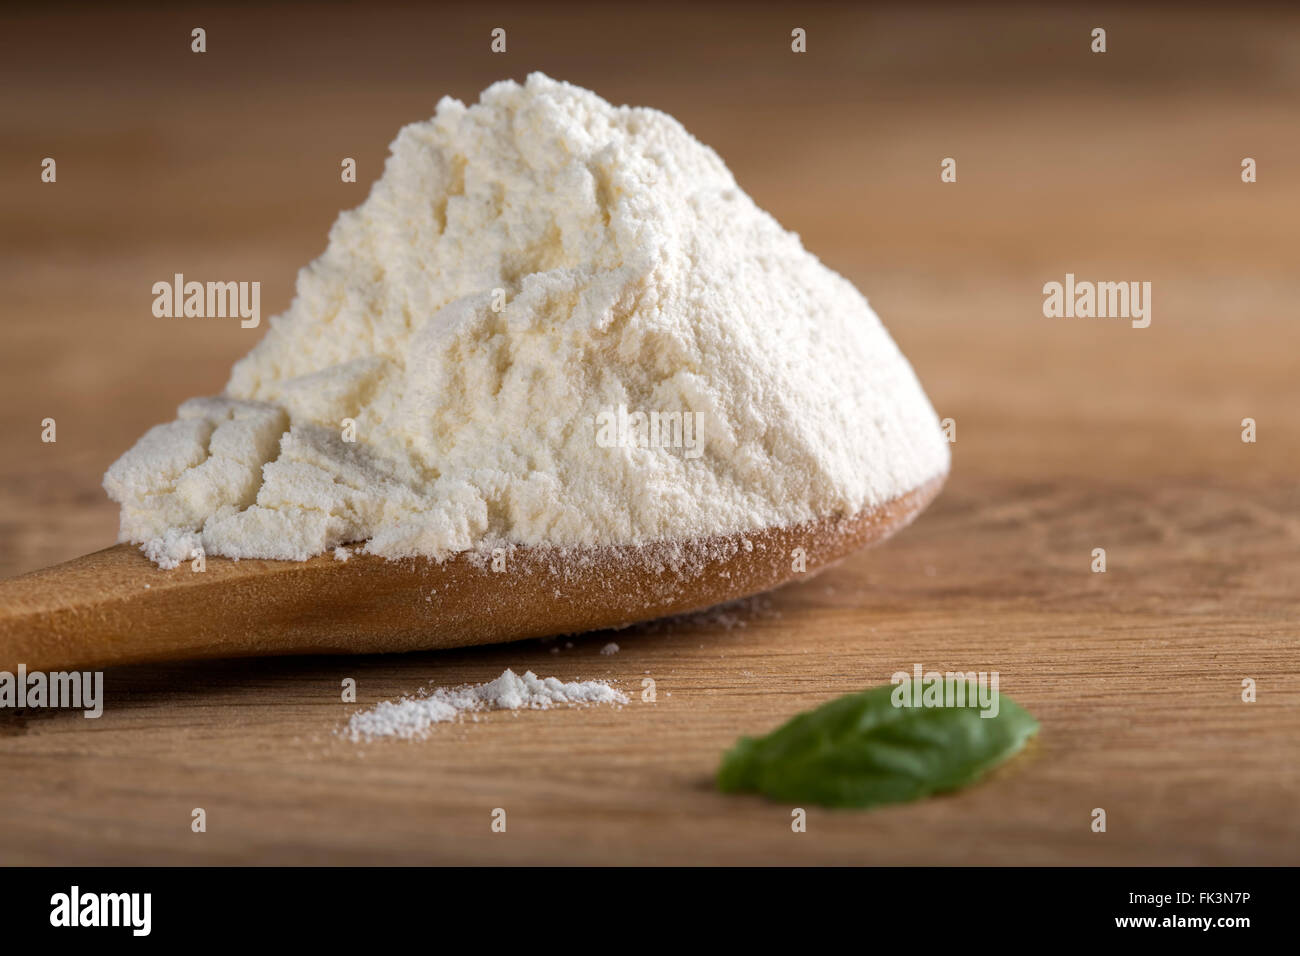 White flour in spoon on wooden background with shallow depth of field Stock Photo